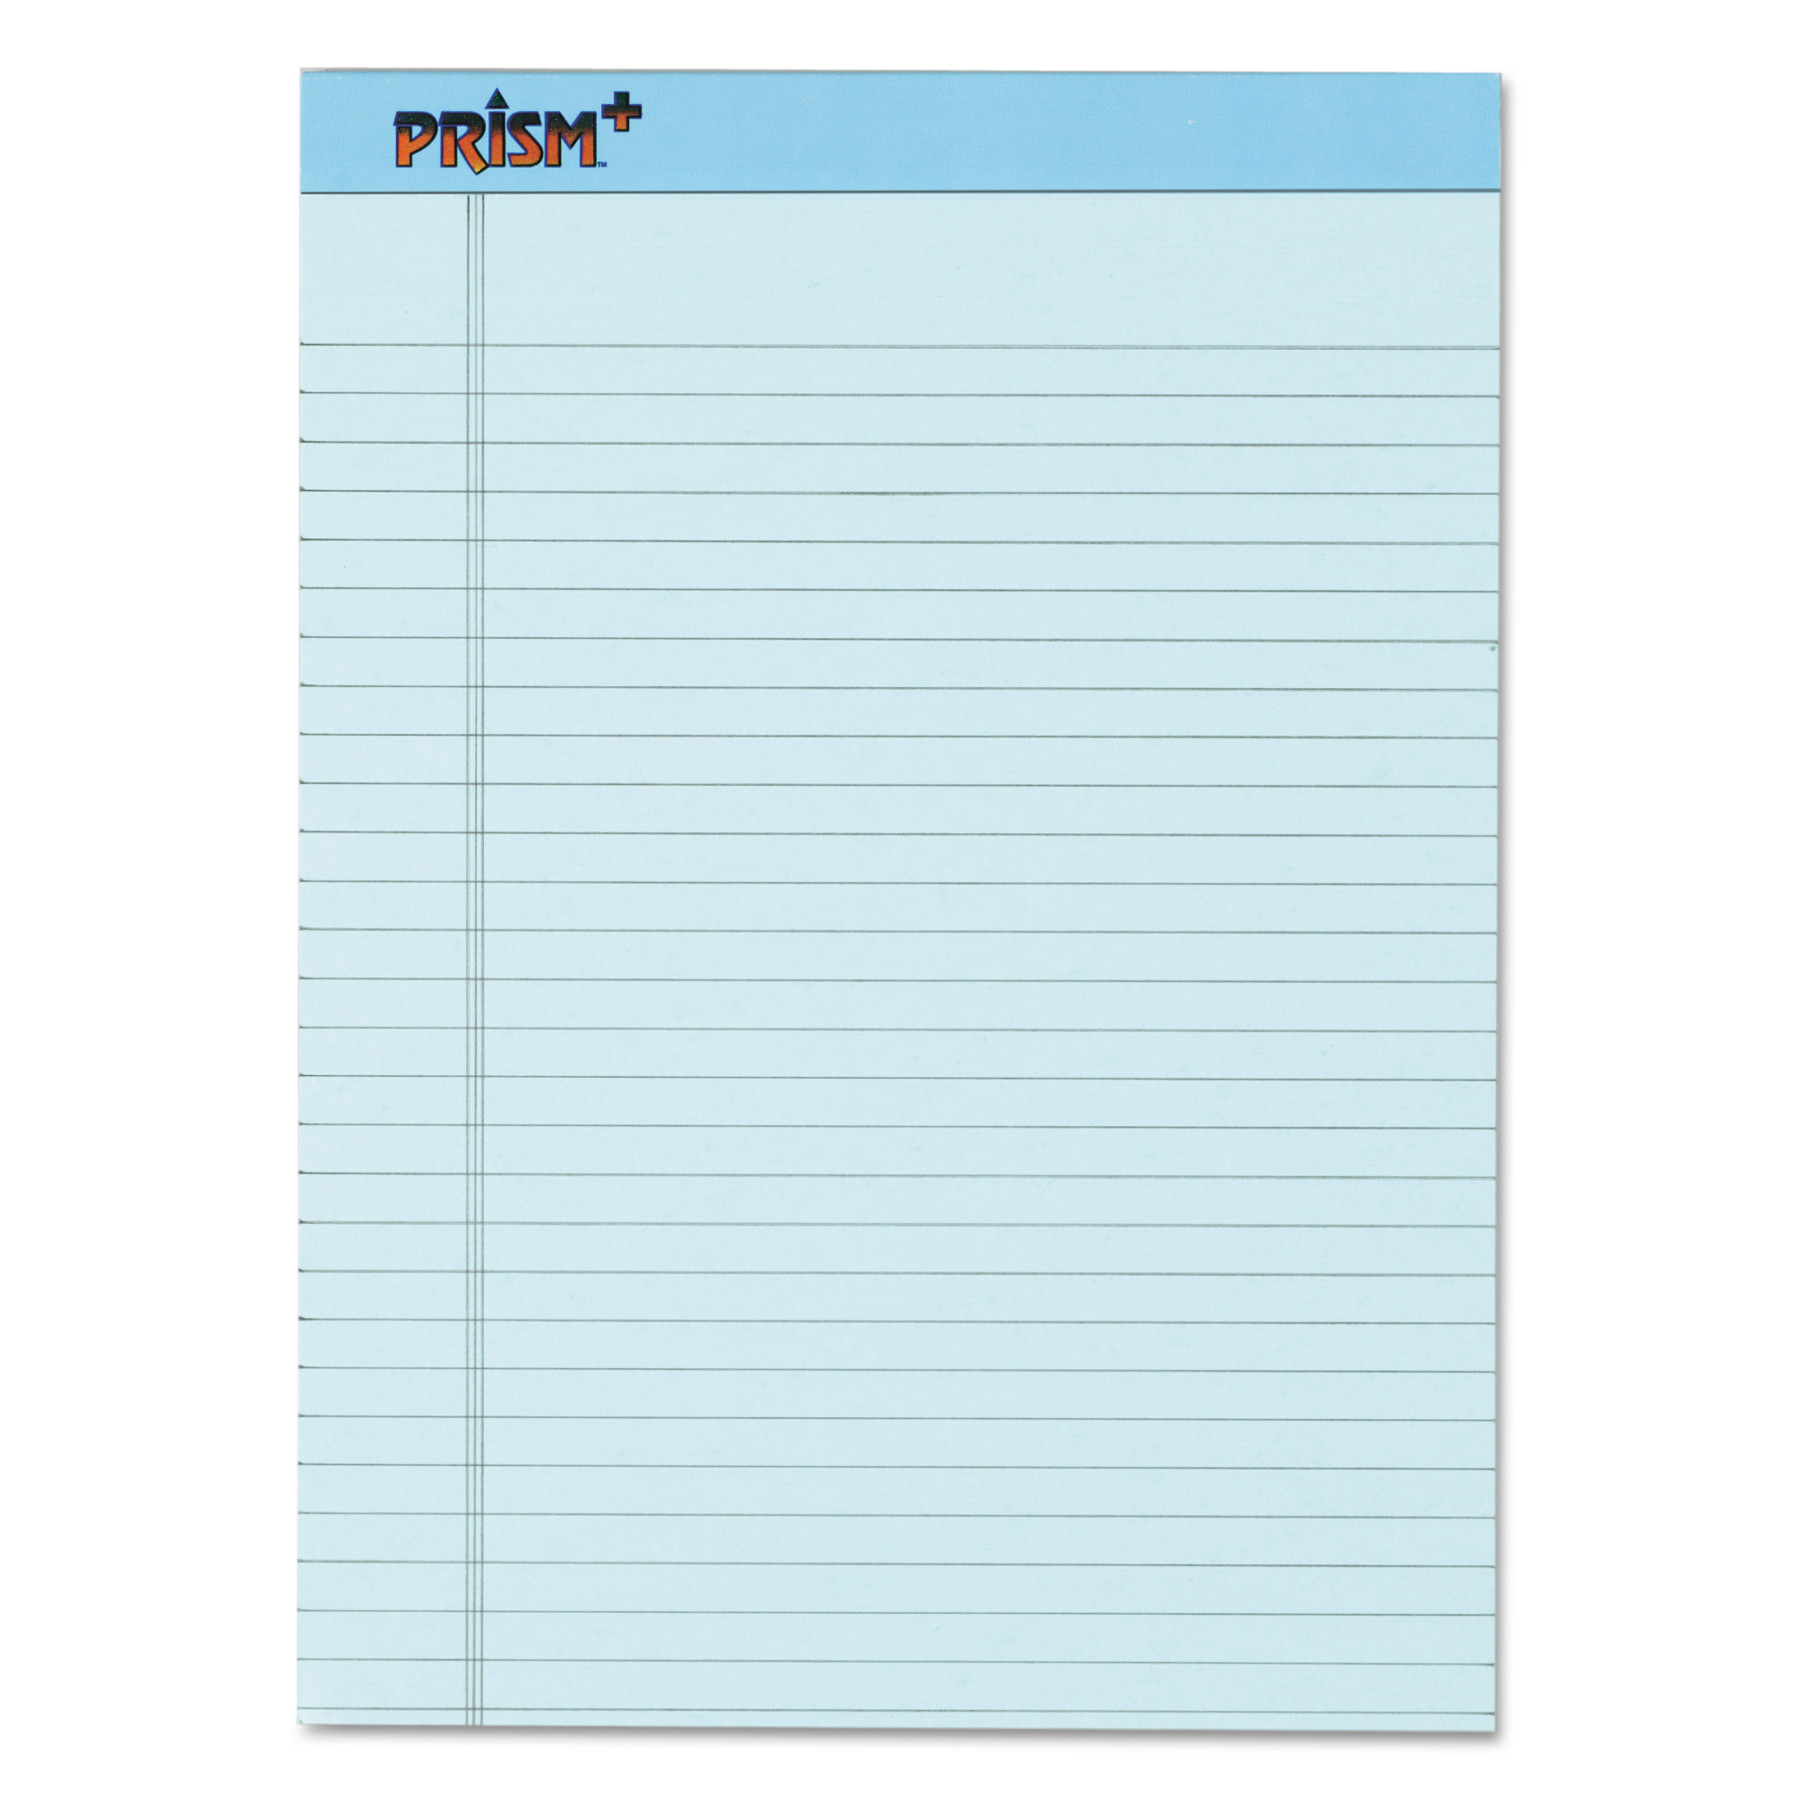 TOPS Prism Plus Colored Paper Pads - 50 Sheets - 0.34" Ruled - 16 lb Basis Weight - 8 1/2" x 11 3/4" - Blue Paper - Perforated